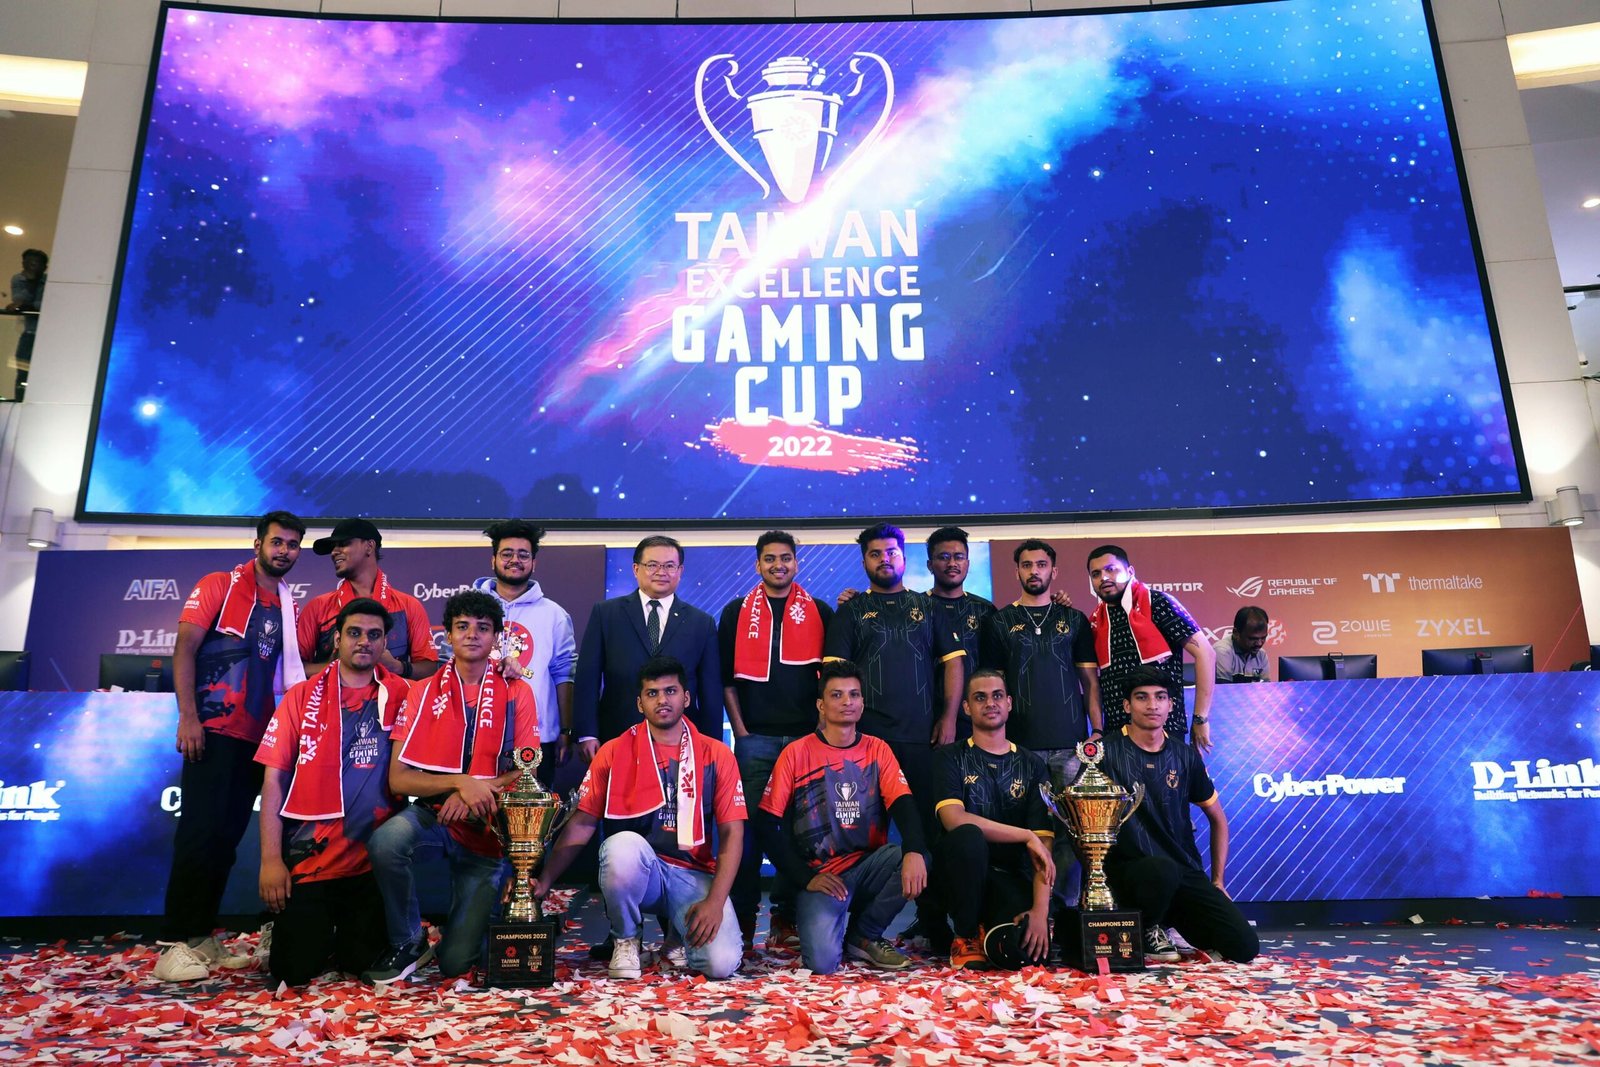 TEGC builds a wonderland for esports gamers in India, bringing ultra-chic and smart gaming gadgets for the ultimate championship